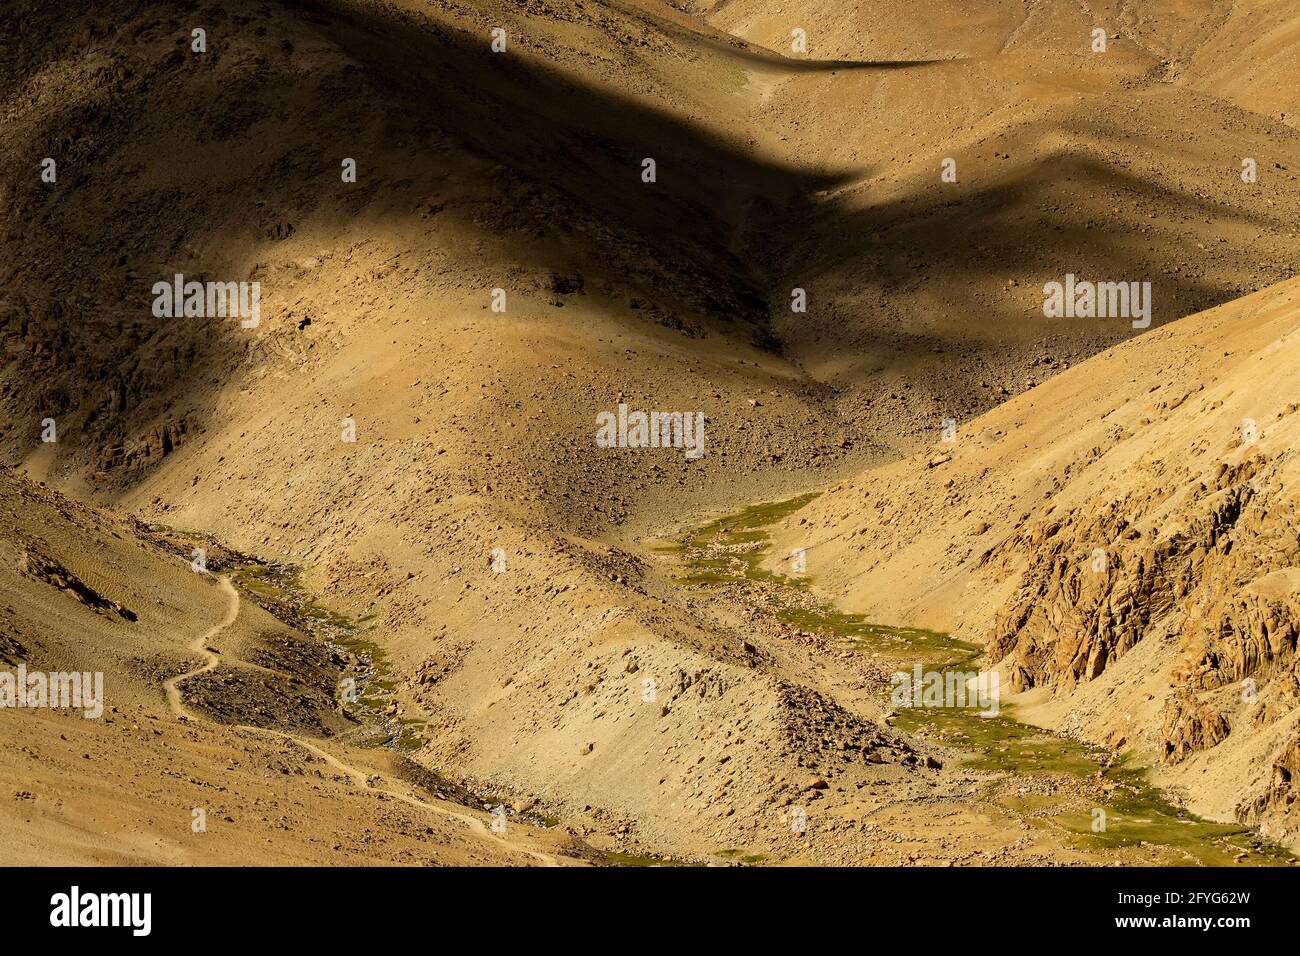 Aerial view of ladakh landscape, play of light and shadow on Himalayan mountains, ladakh - union territory of India Stock Photo